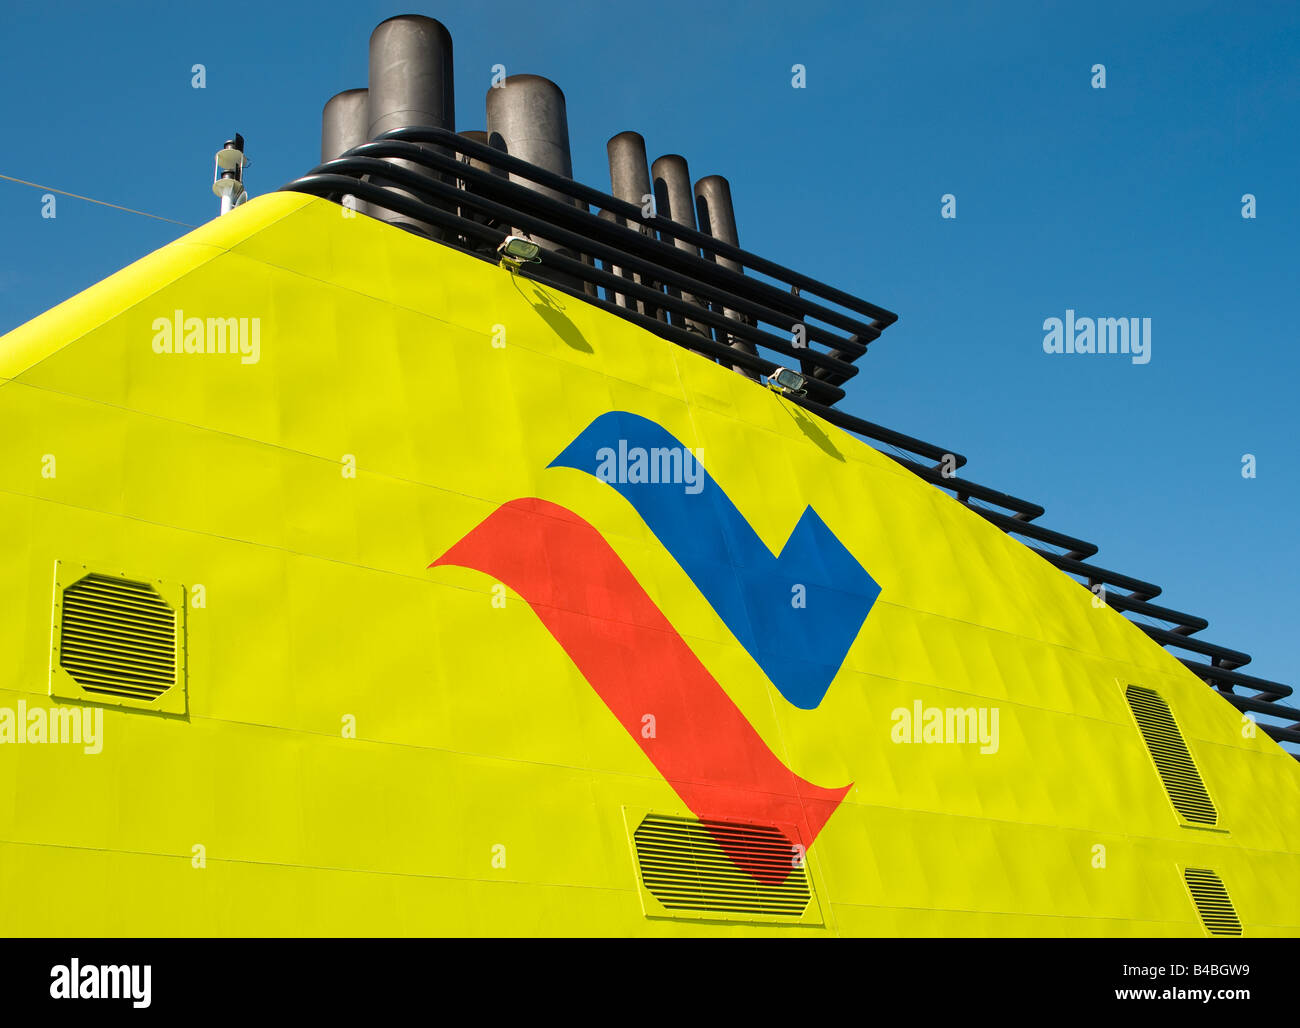 Detail of funnel, on the fast ropax ferry, MS Pascal Lota, formerly MS Superstar (2008), sailing between Helsinki, Finland, and Tallinn, Estonia Stock Photo